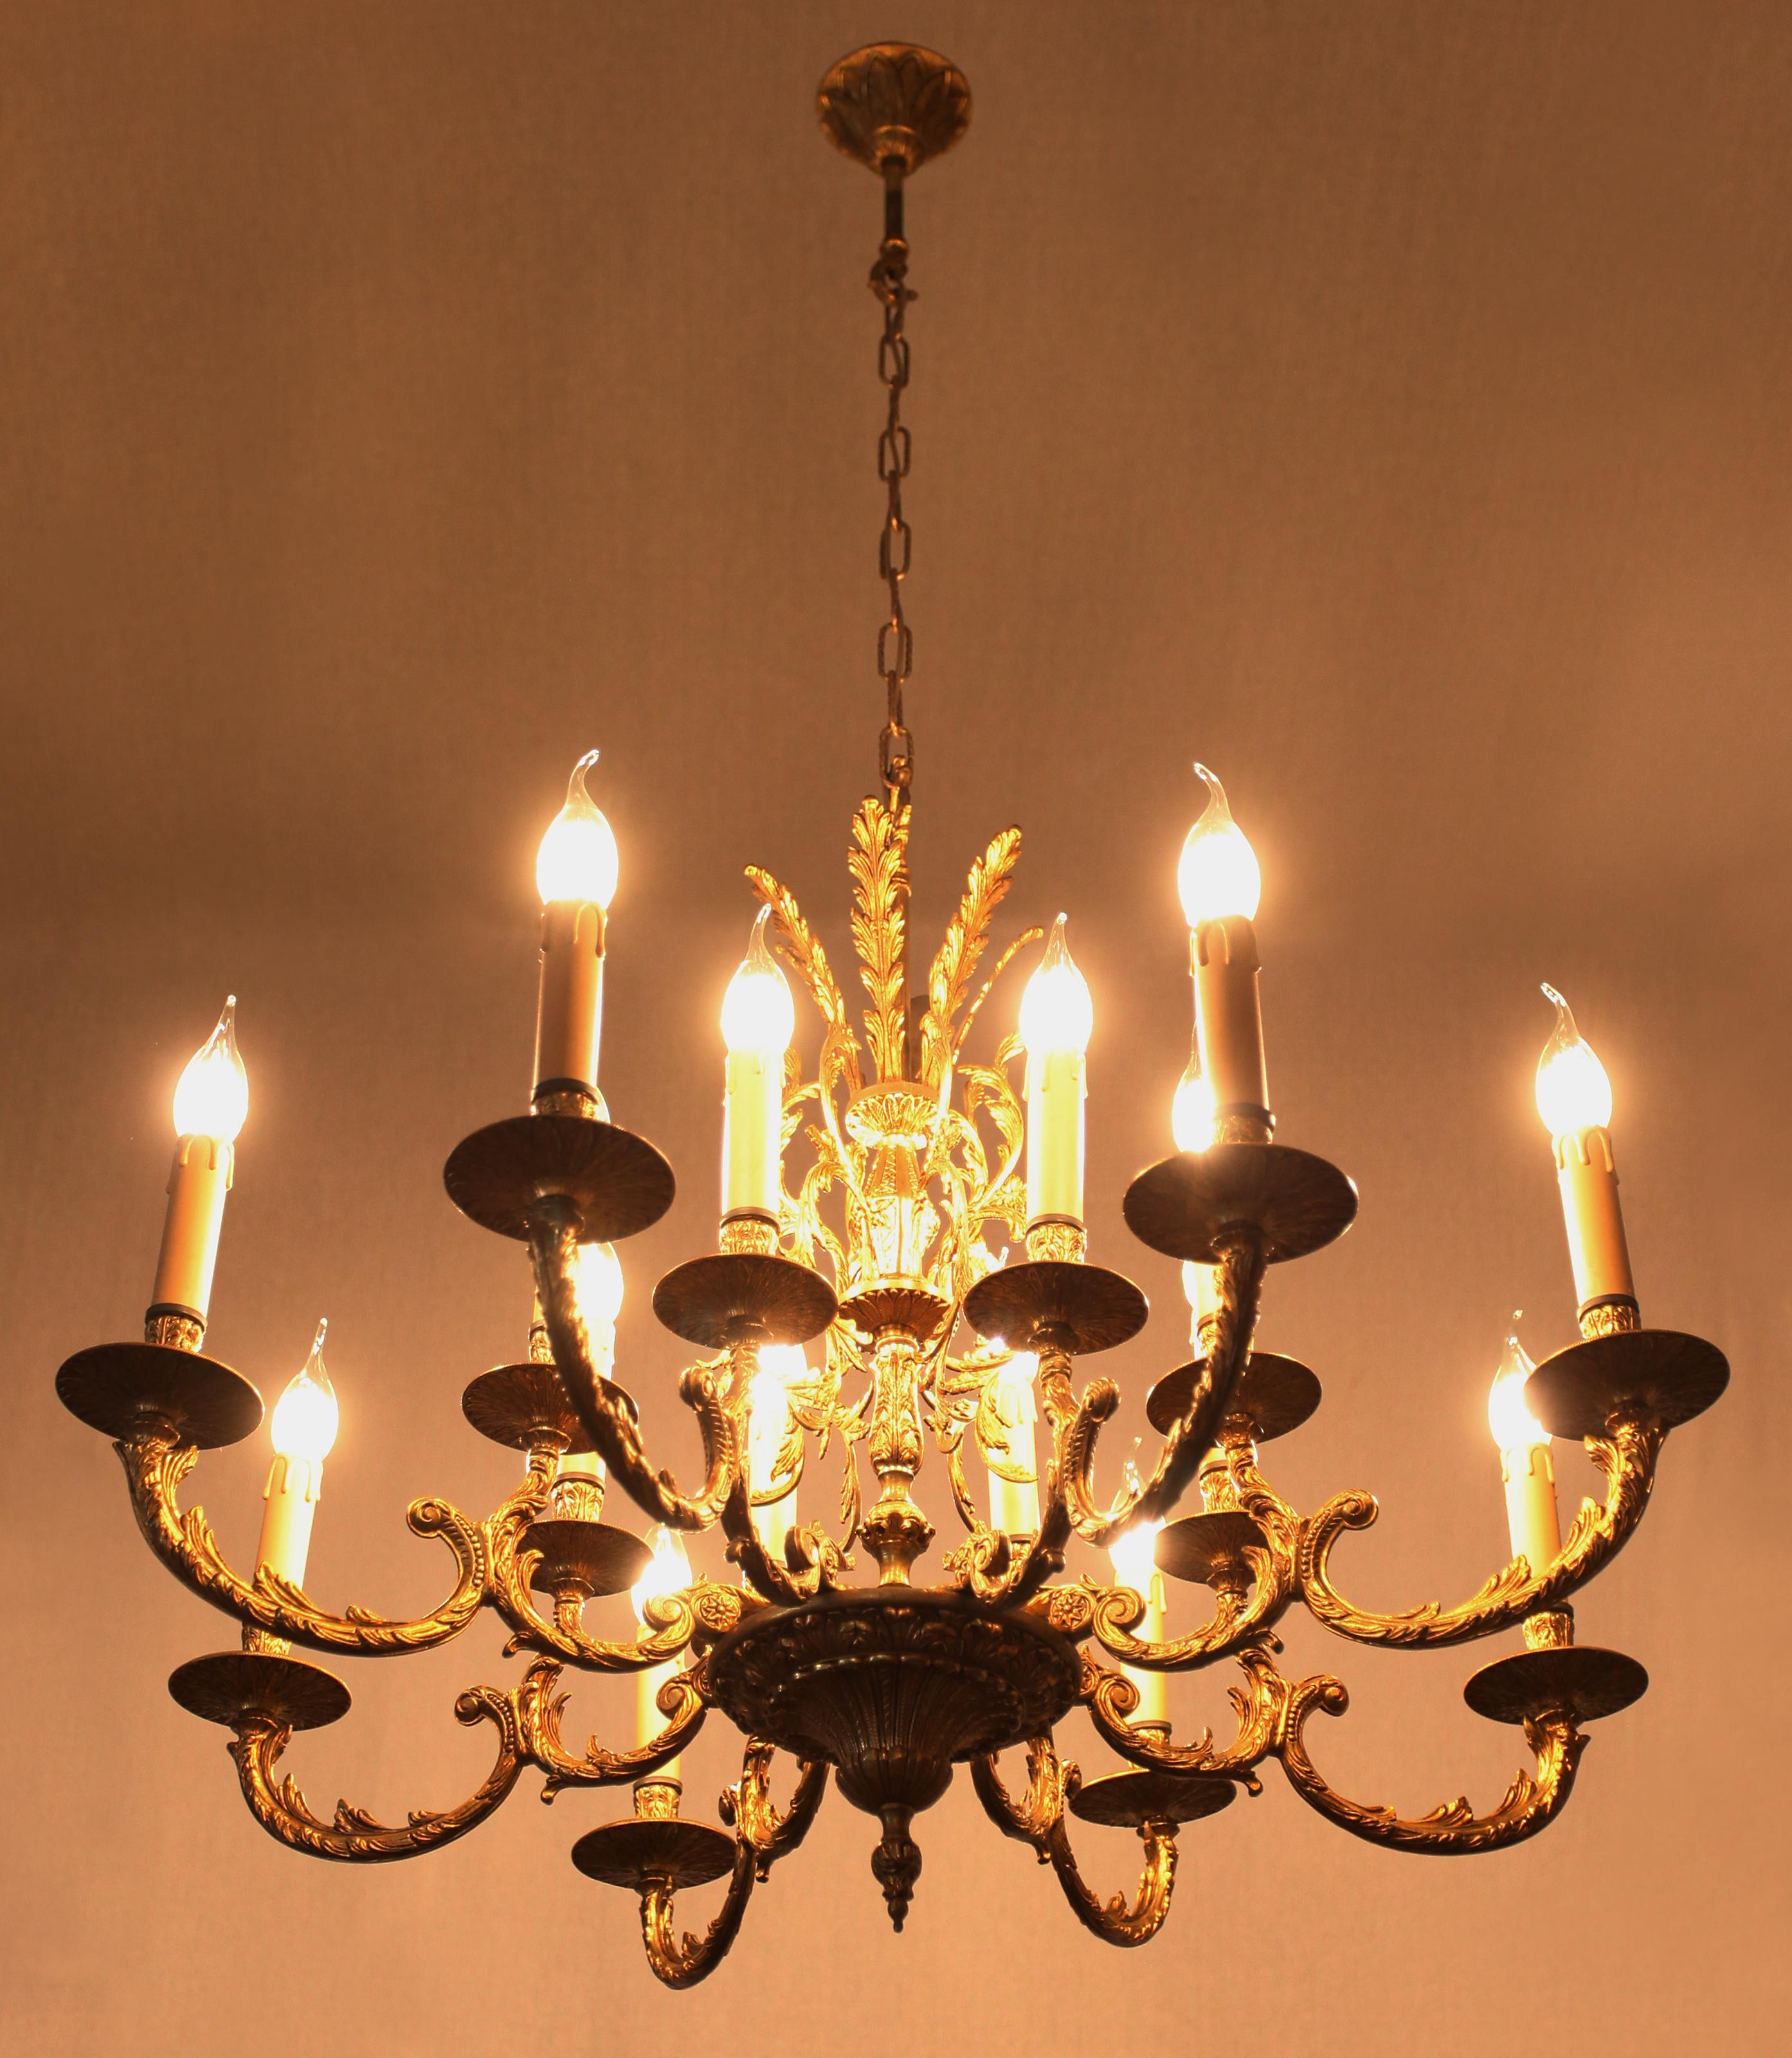 A richly decorated chandelier made of polished brass in the Rococo style. The chandelier has a completely restored electrical installation in copper (new wiring, sockets and sockets) - ready for use. The chandelier is for classic candle bulbs with